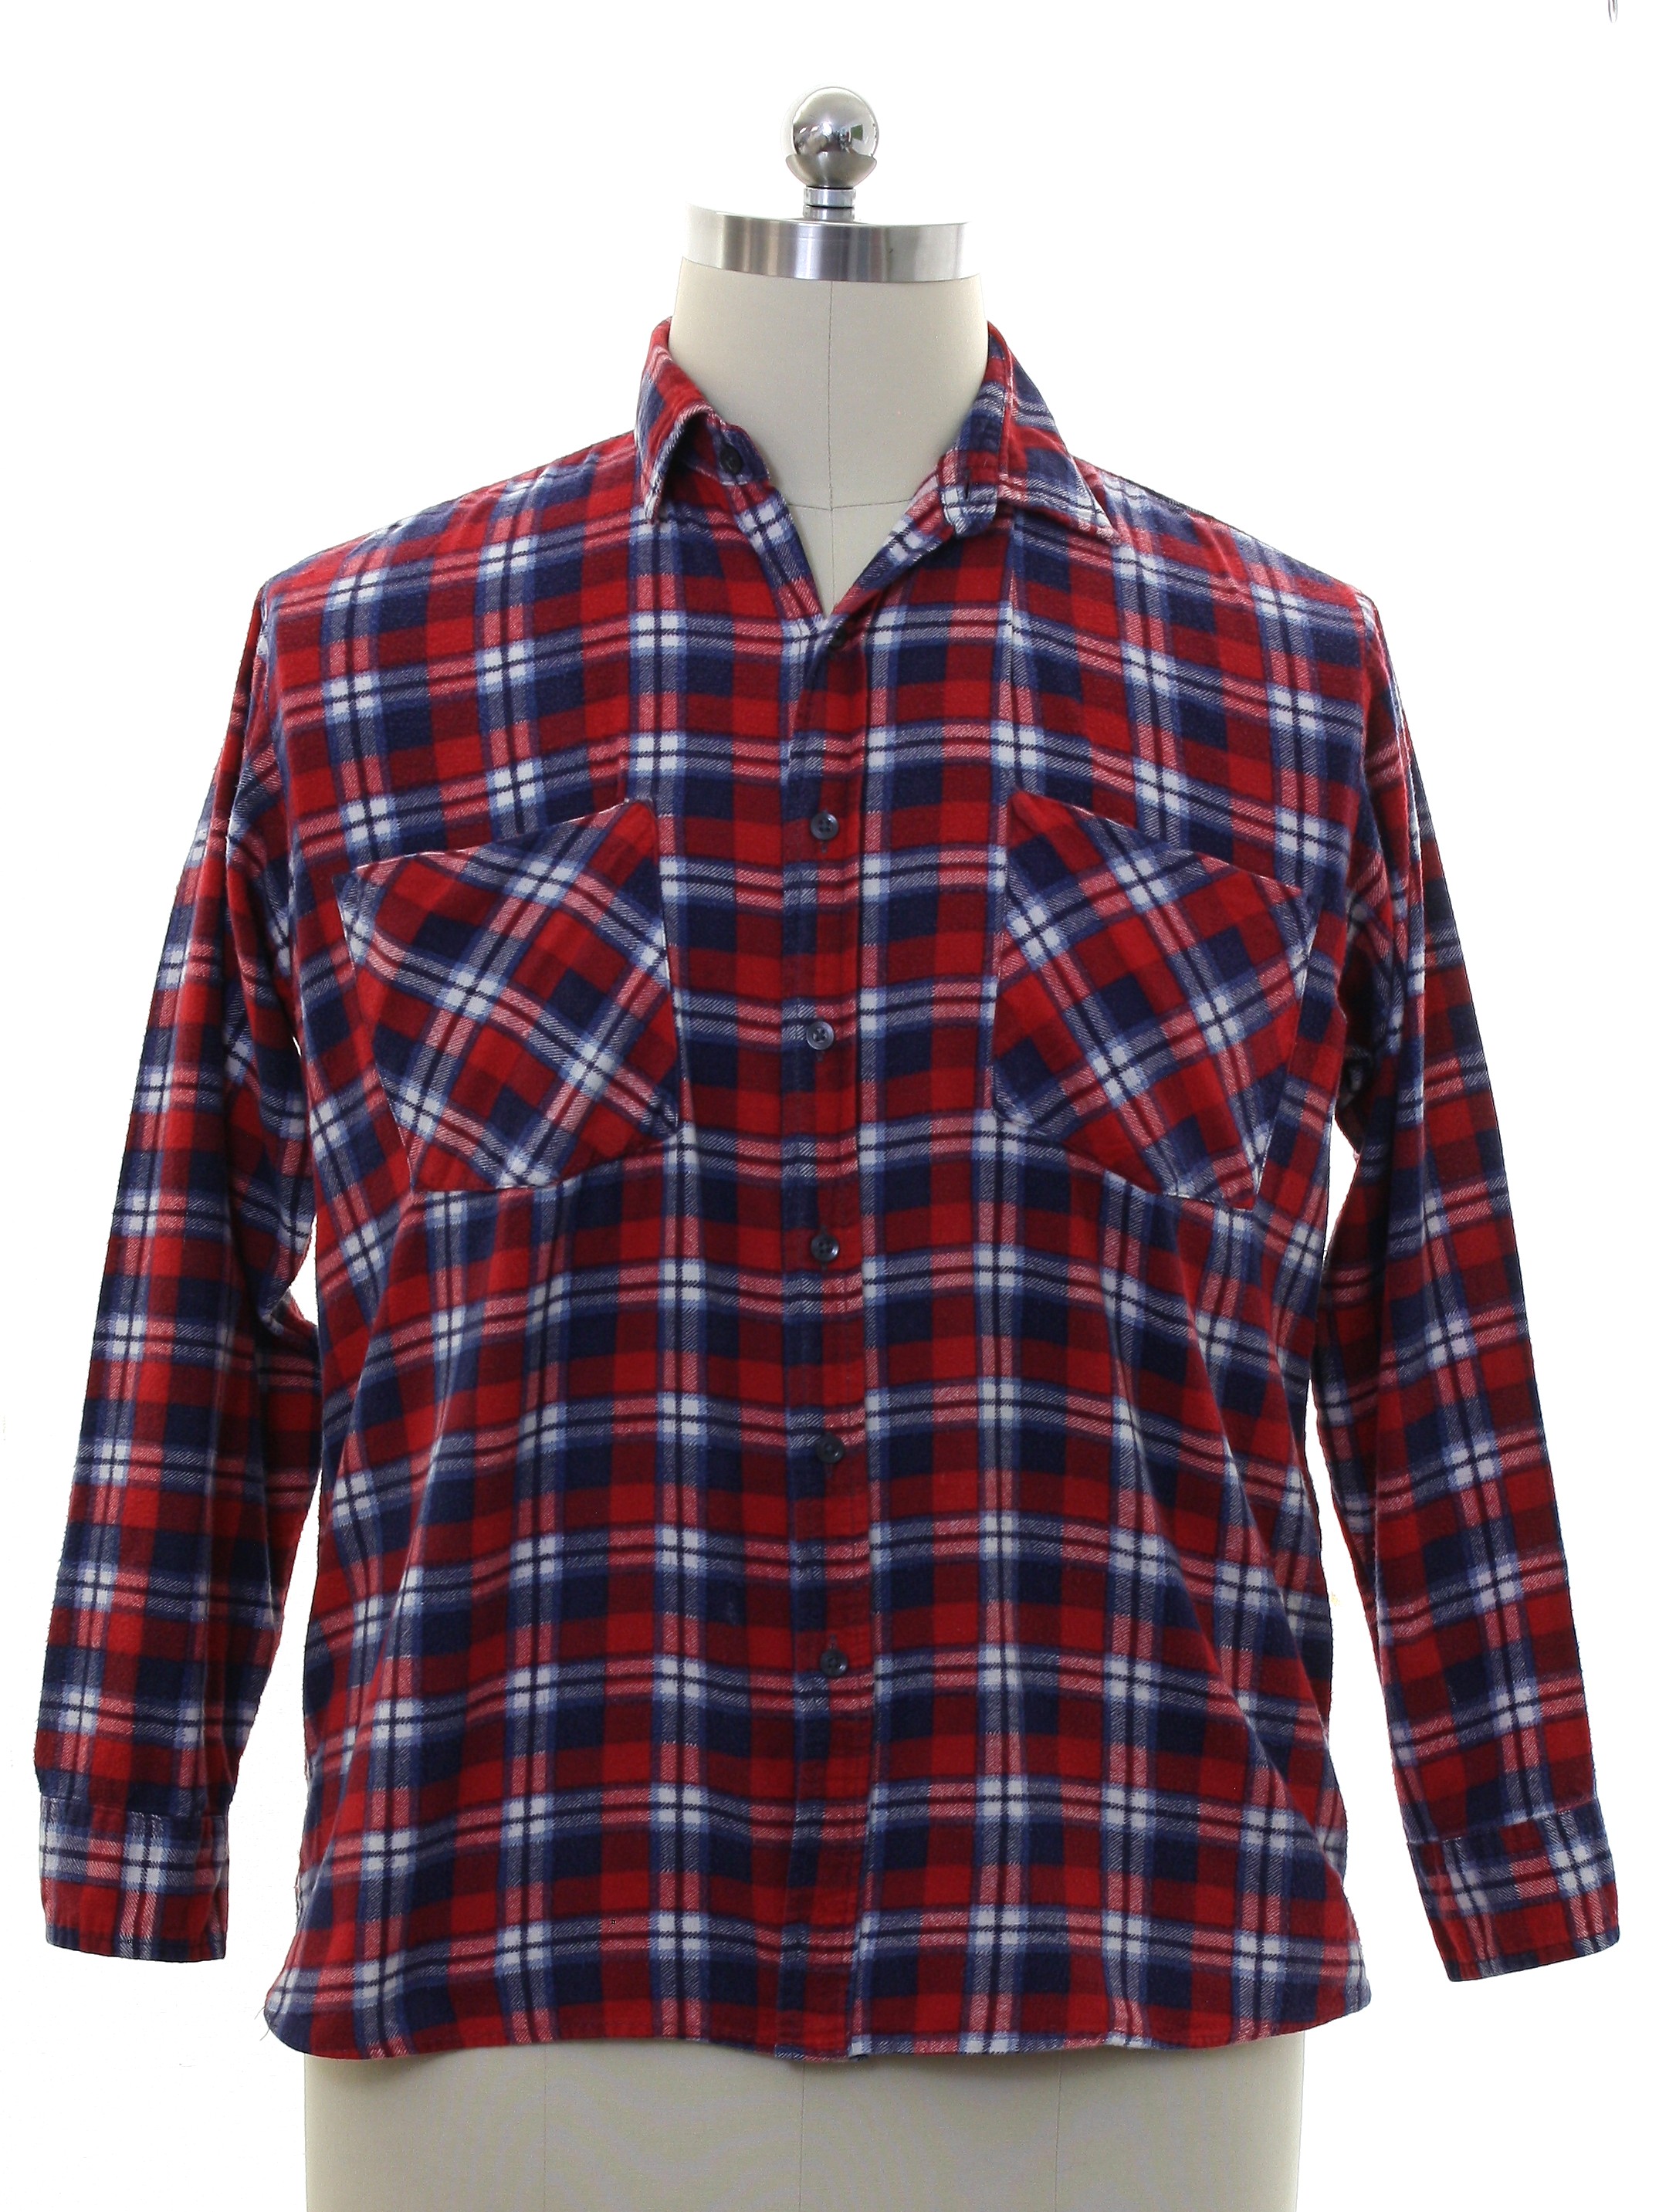 mens red and white flannel shirt